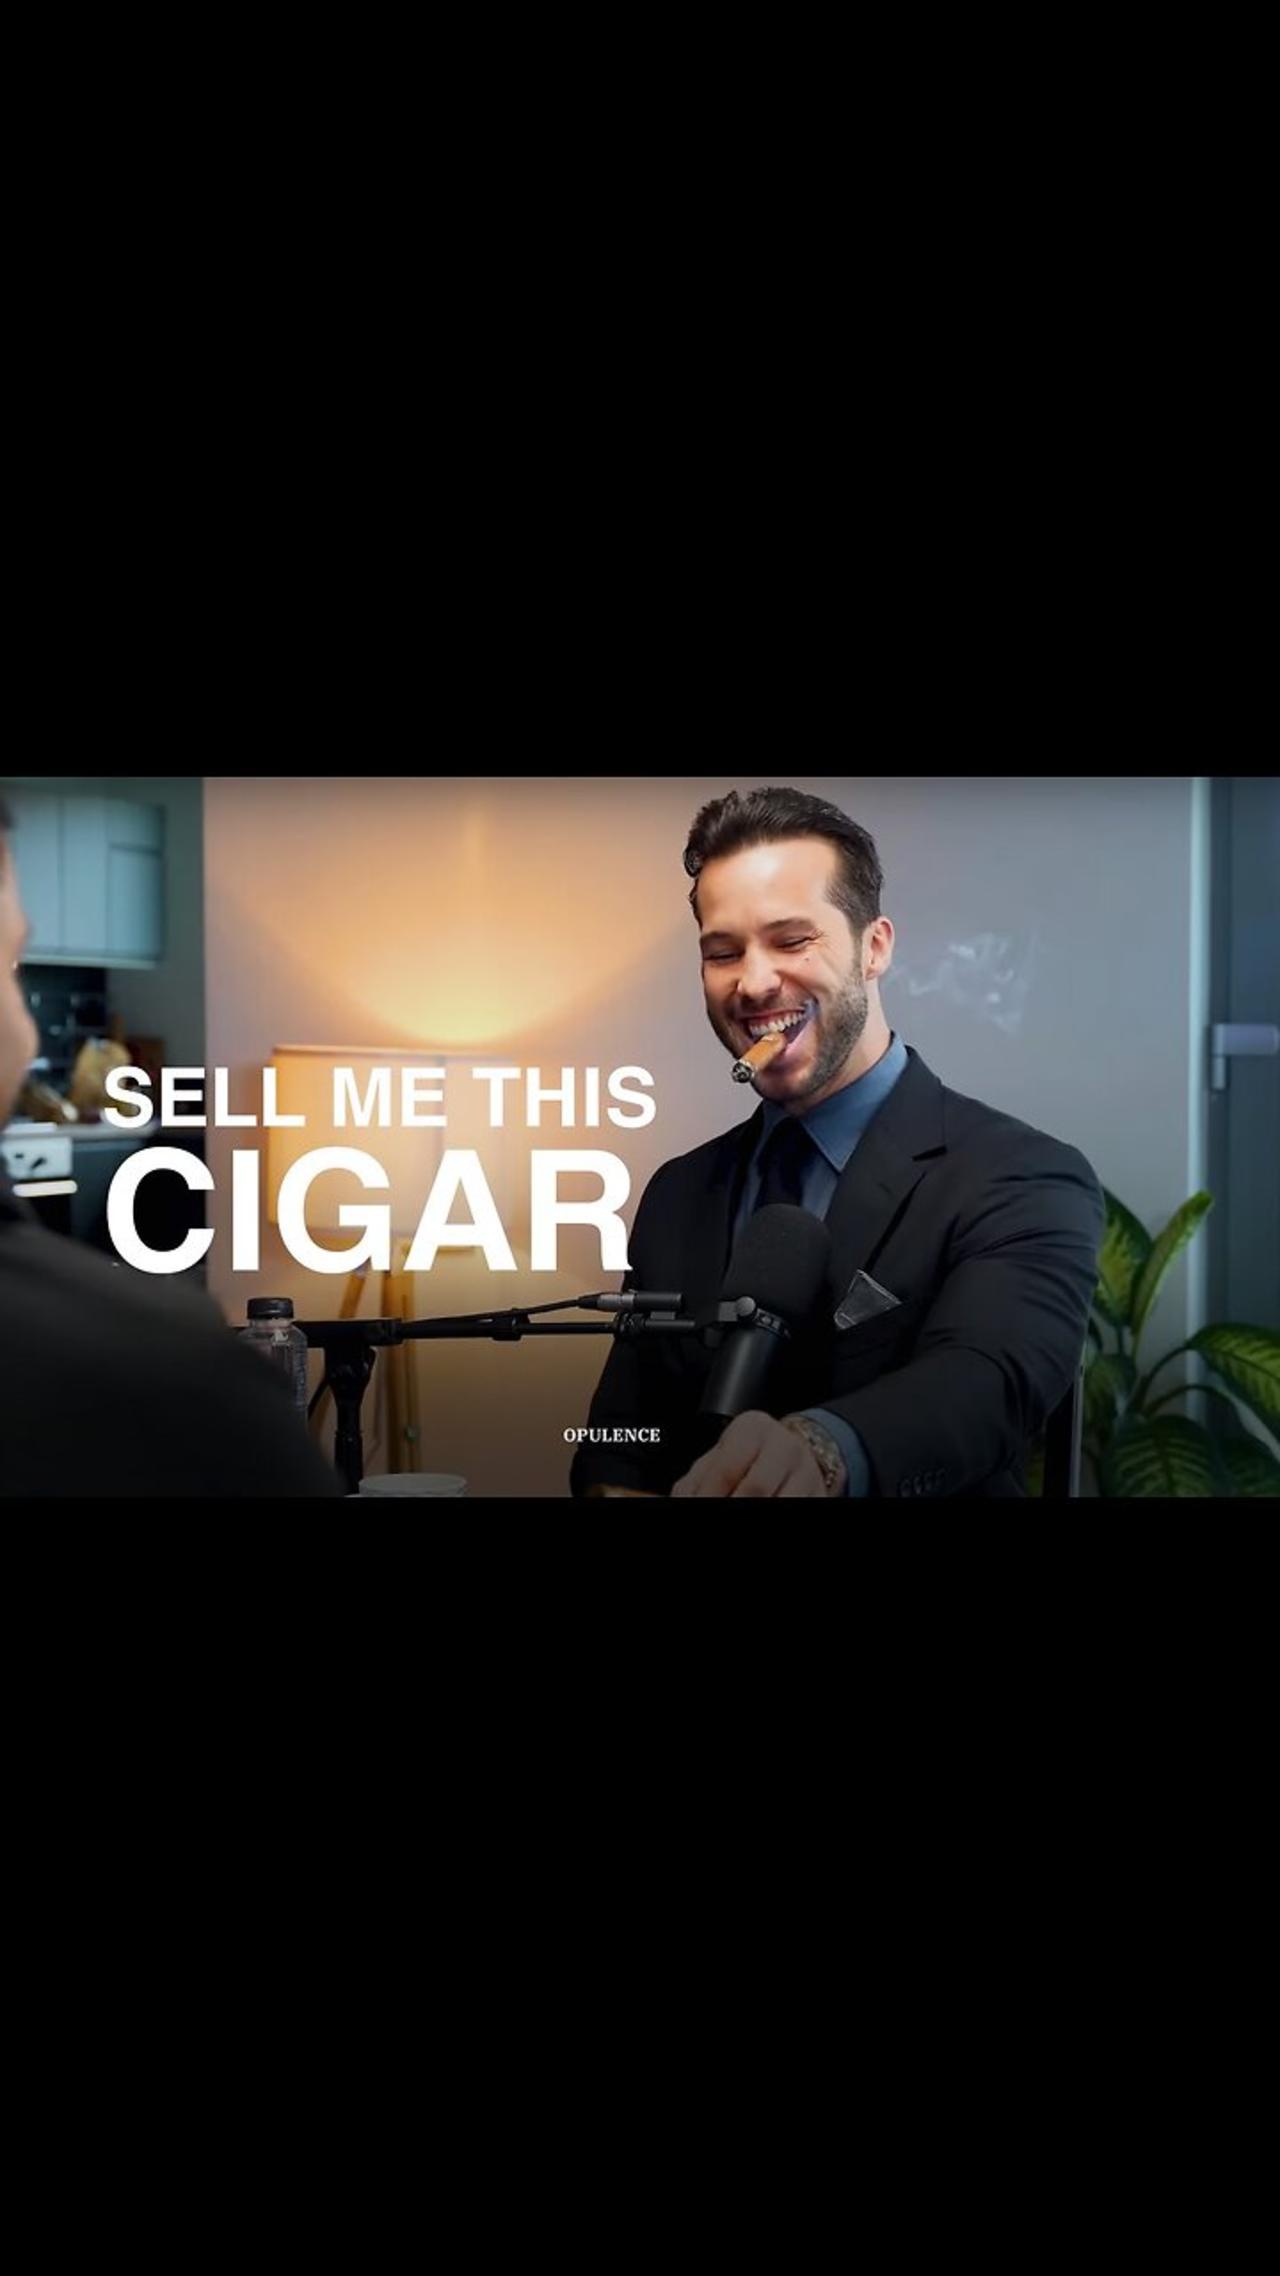 Tristan Tate Gets CHALLENGED To Sell Cigars ON CAMERA